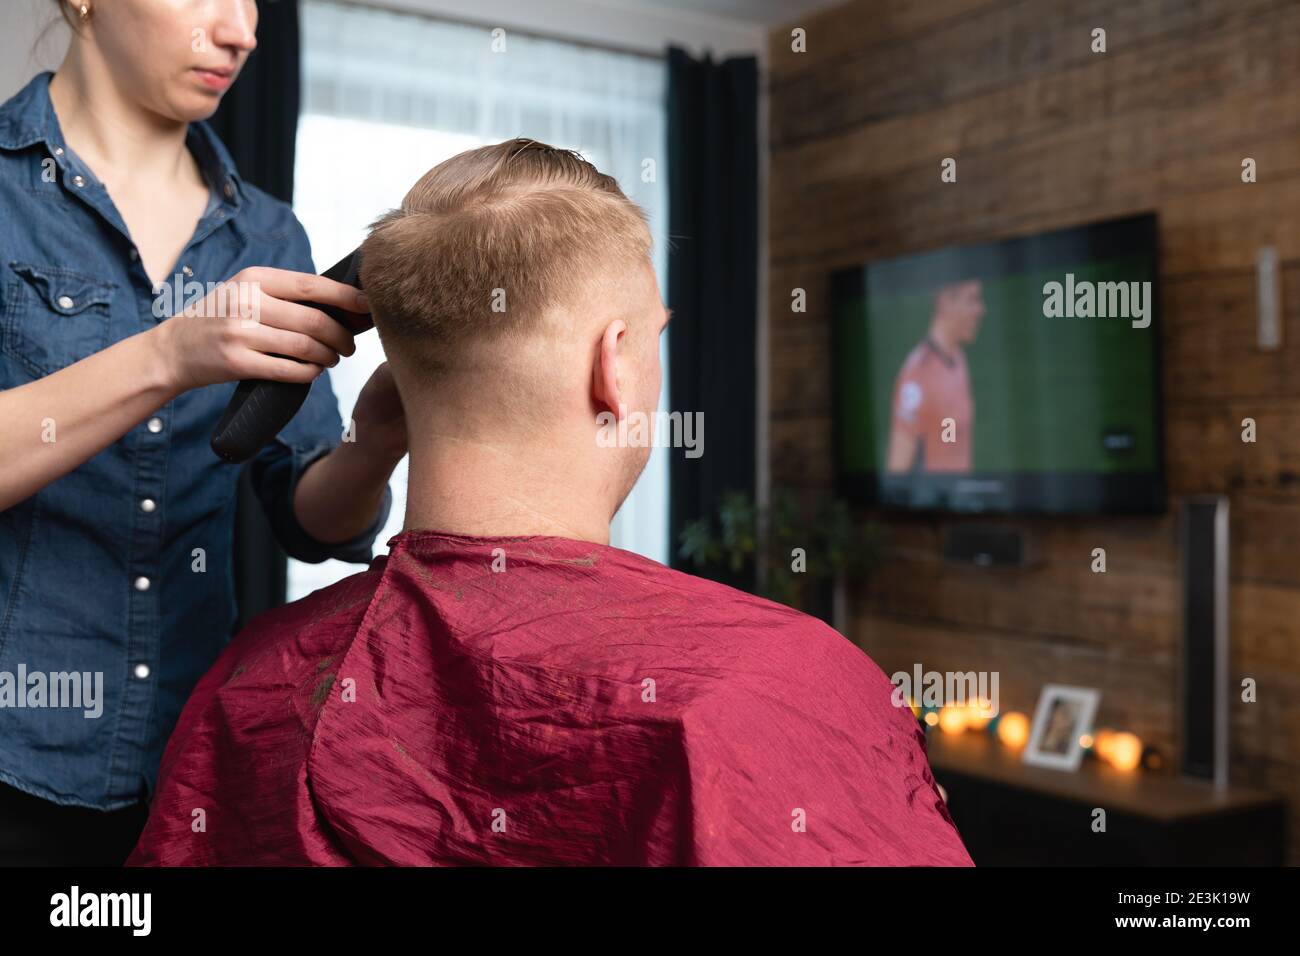 Wife cutting husband's hair at home in front of TV with clipper and holding comb in other hand. Stock Photo